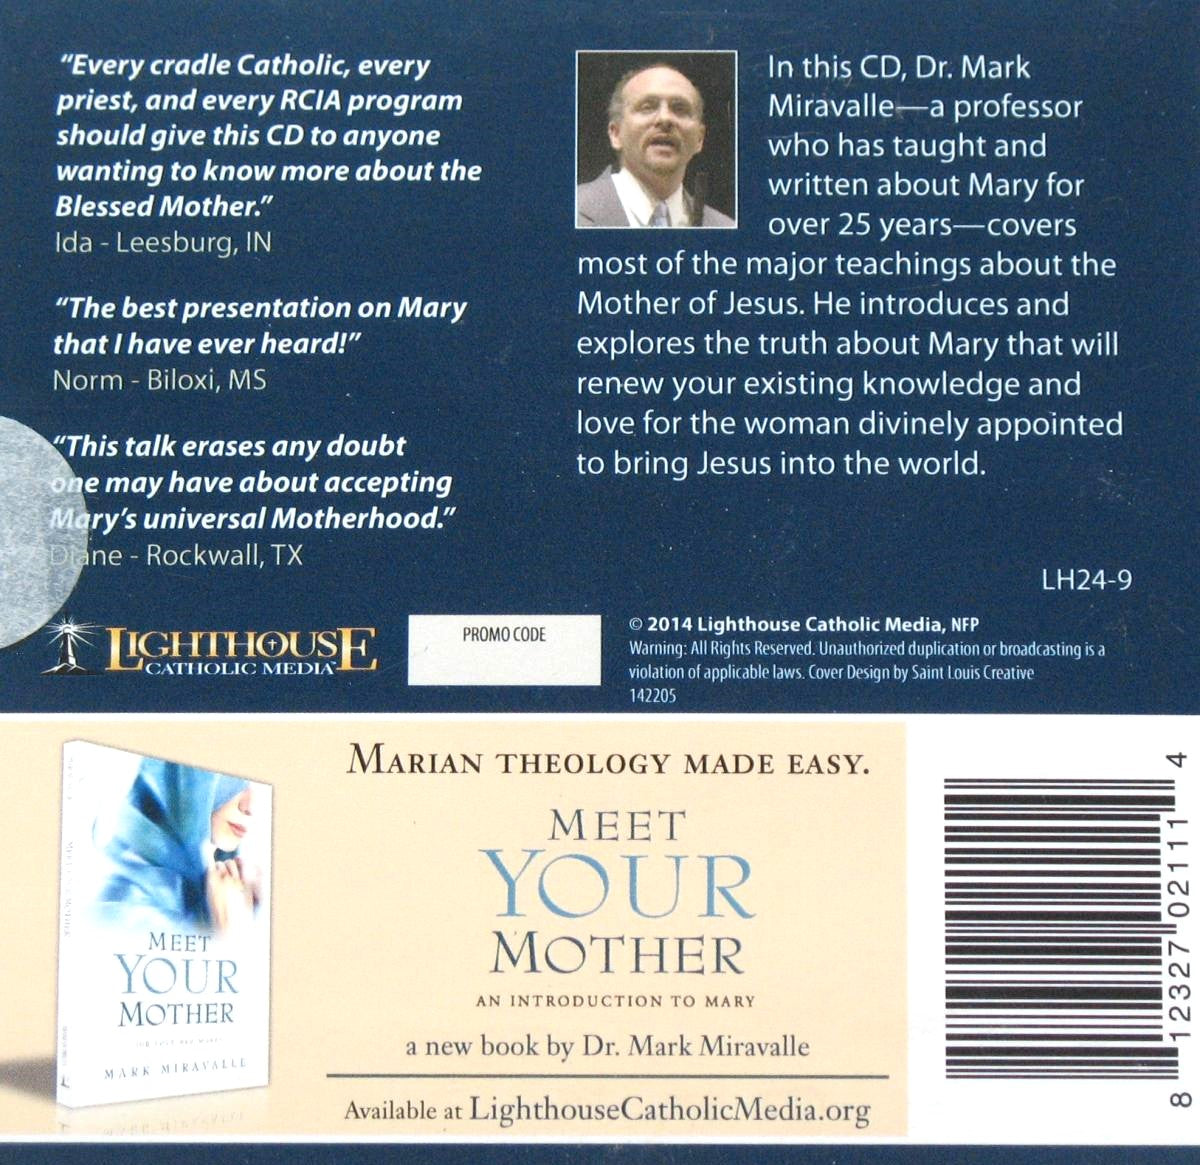 Meet Your Mother : An Introduction to Mary - CD Talk by Dr. Mark Miravalle